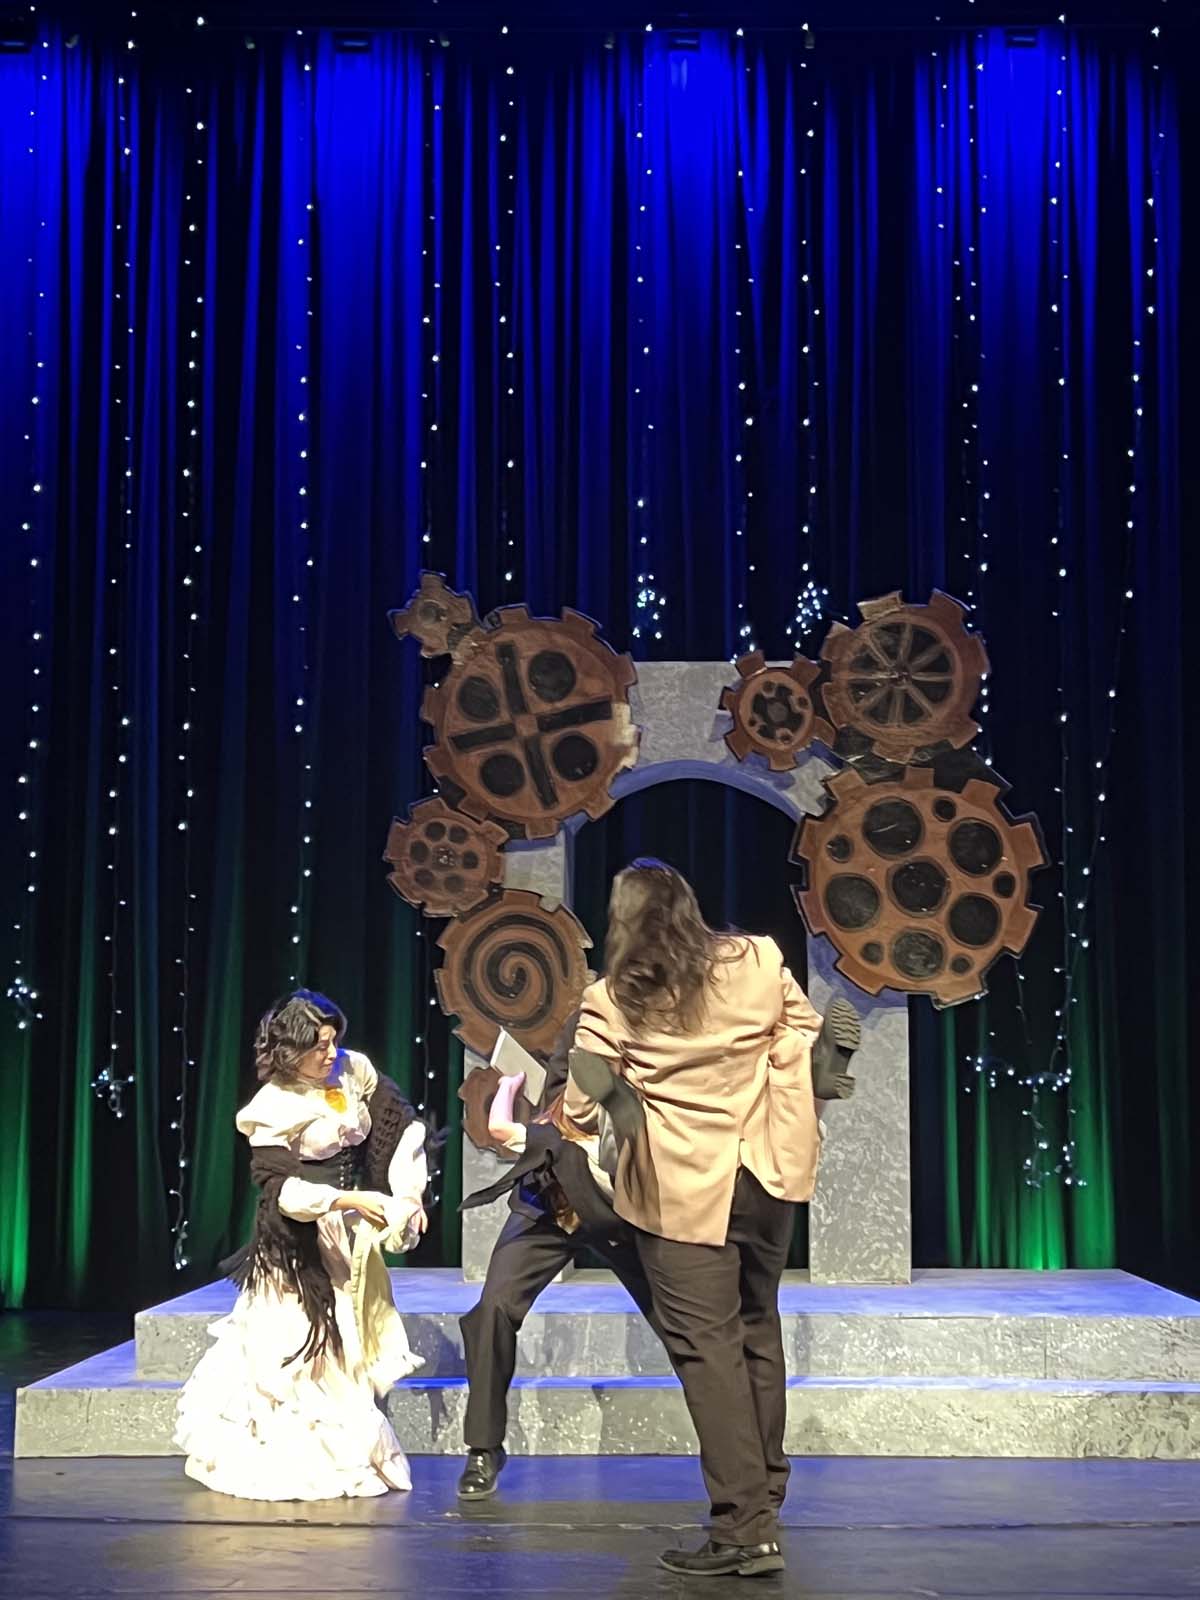 Performers in A Midsummer Night's Dream